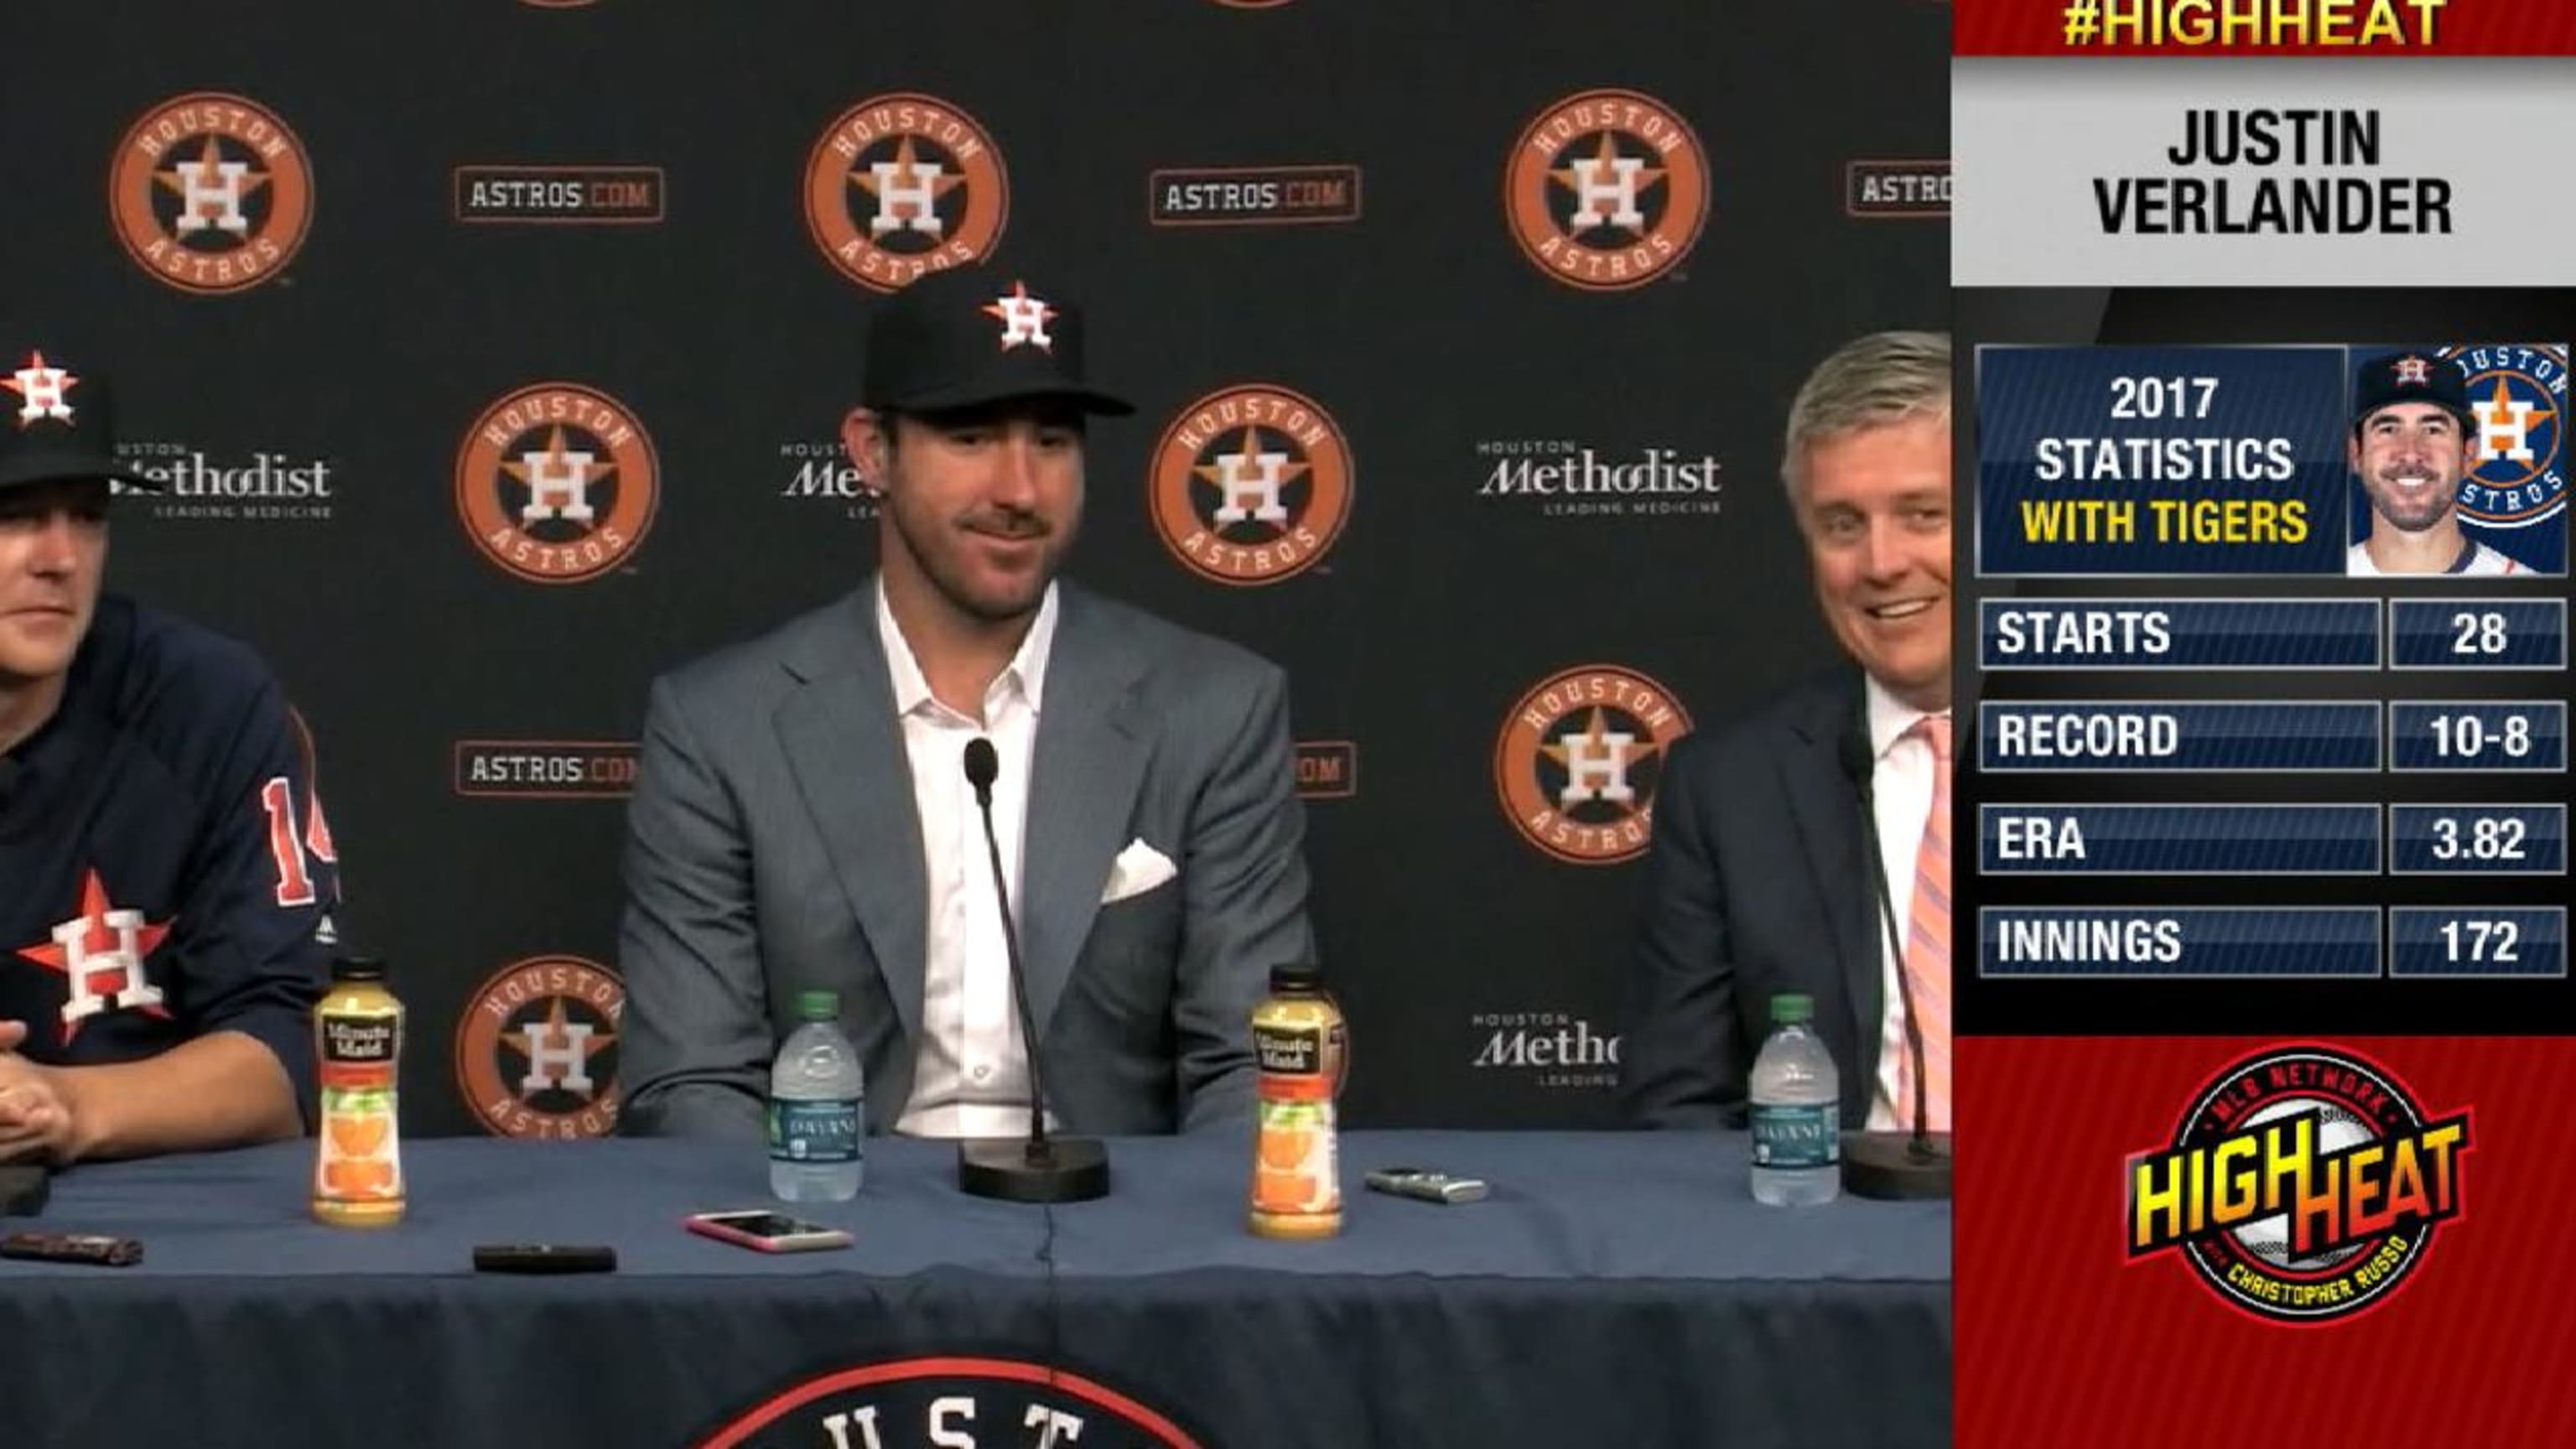 New Astro Justin Verlander: Important to 'make a good first